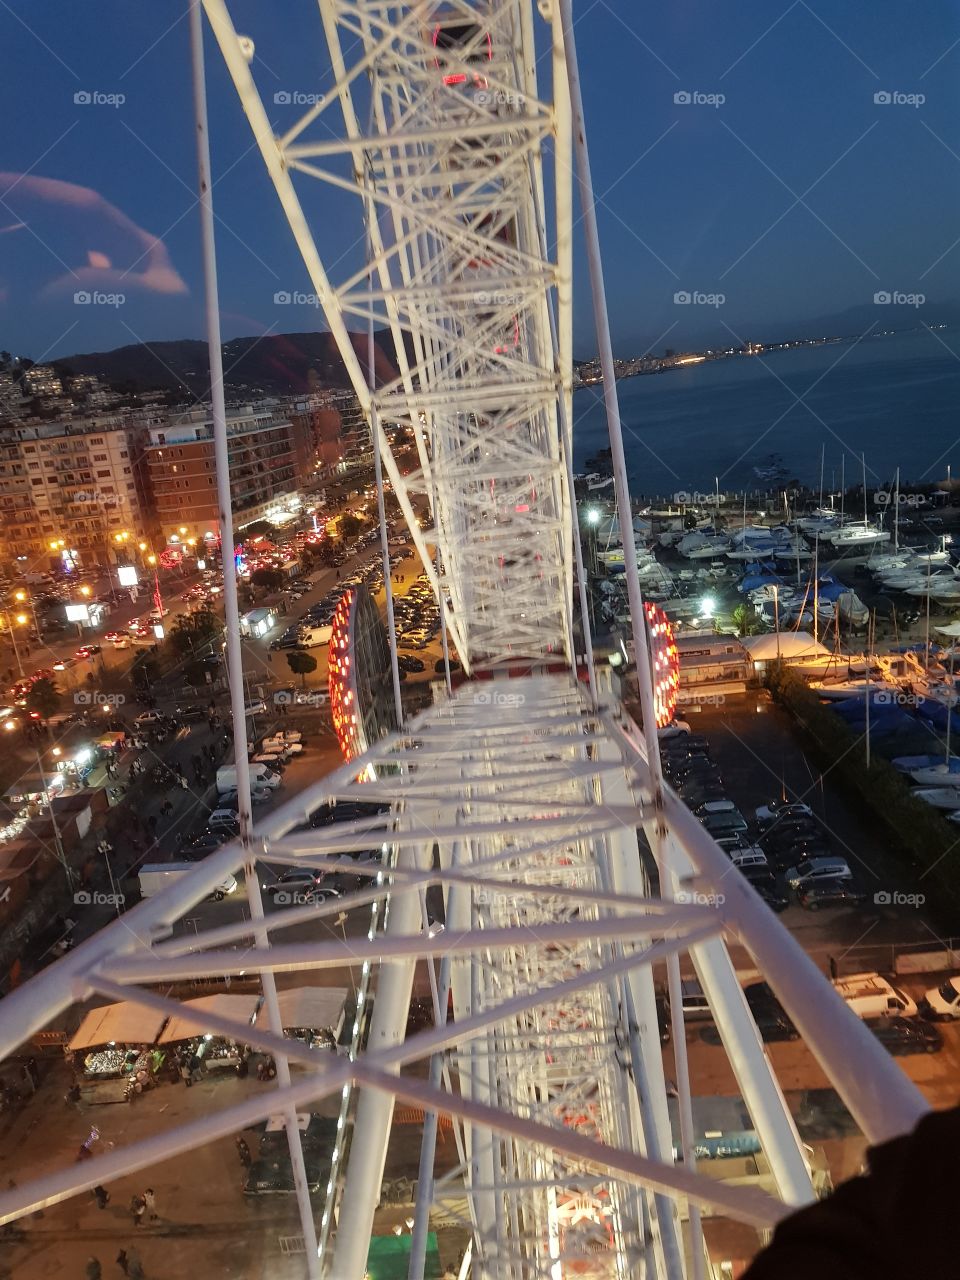 on the big wheel in Salerno, Italy